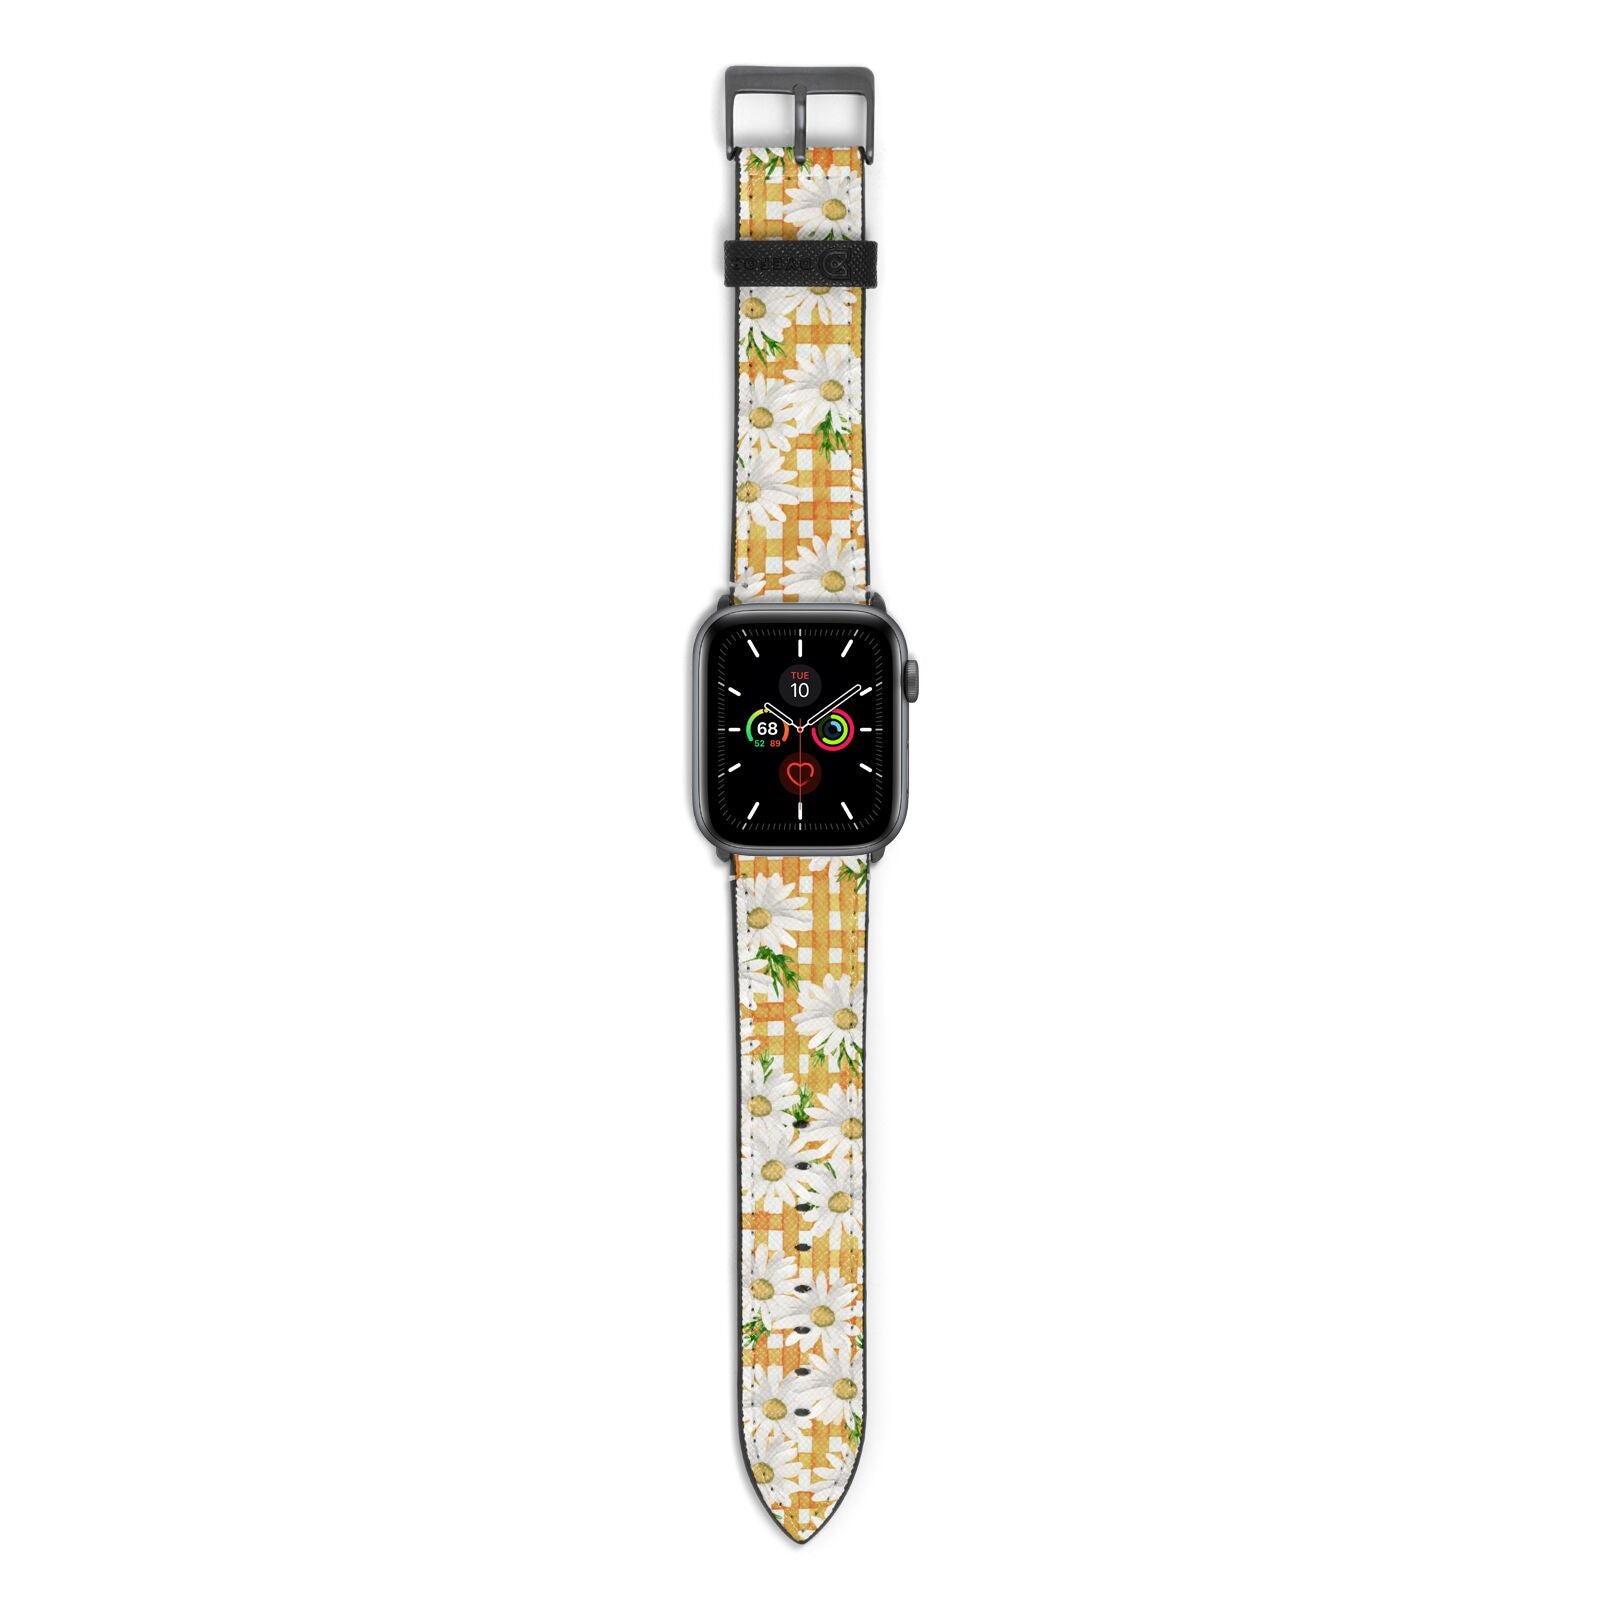 Checkered Daisy Apple Watch Strap with Space Grey Hardware